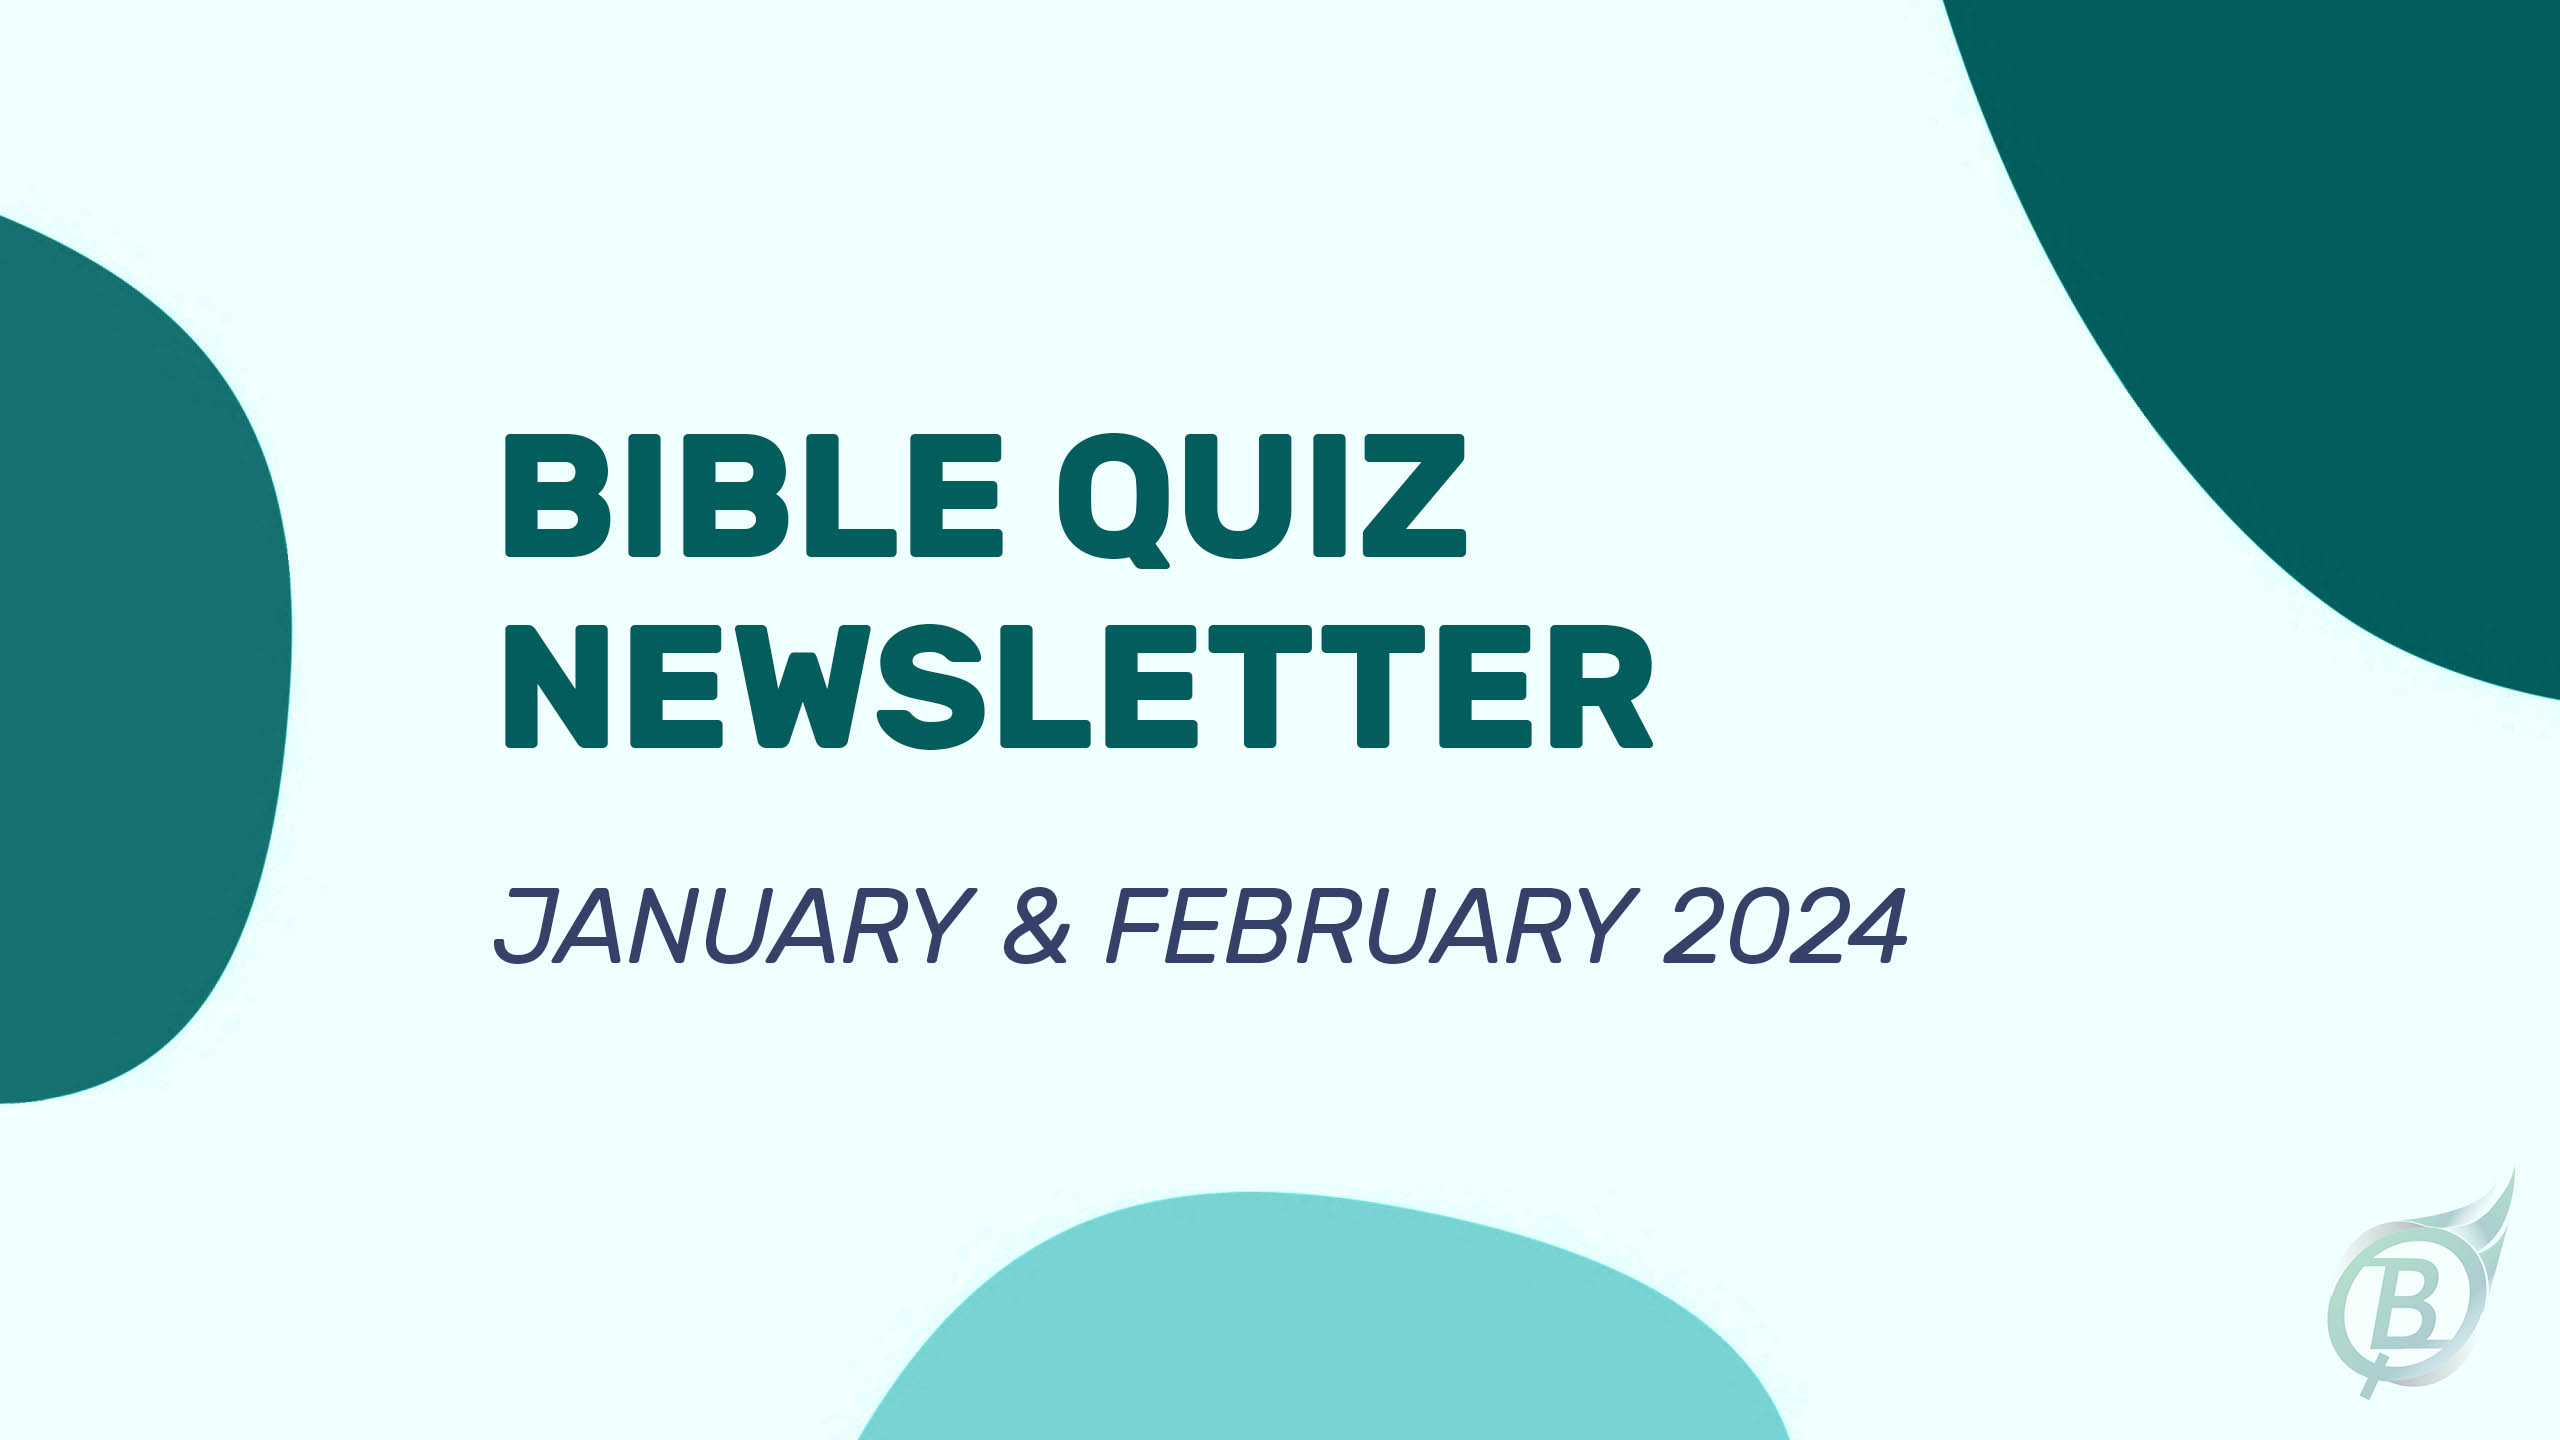 Bible Quiz Newsletter - January and February 2024